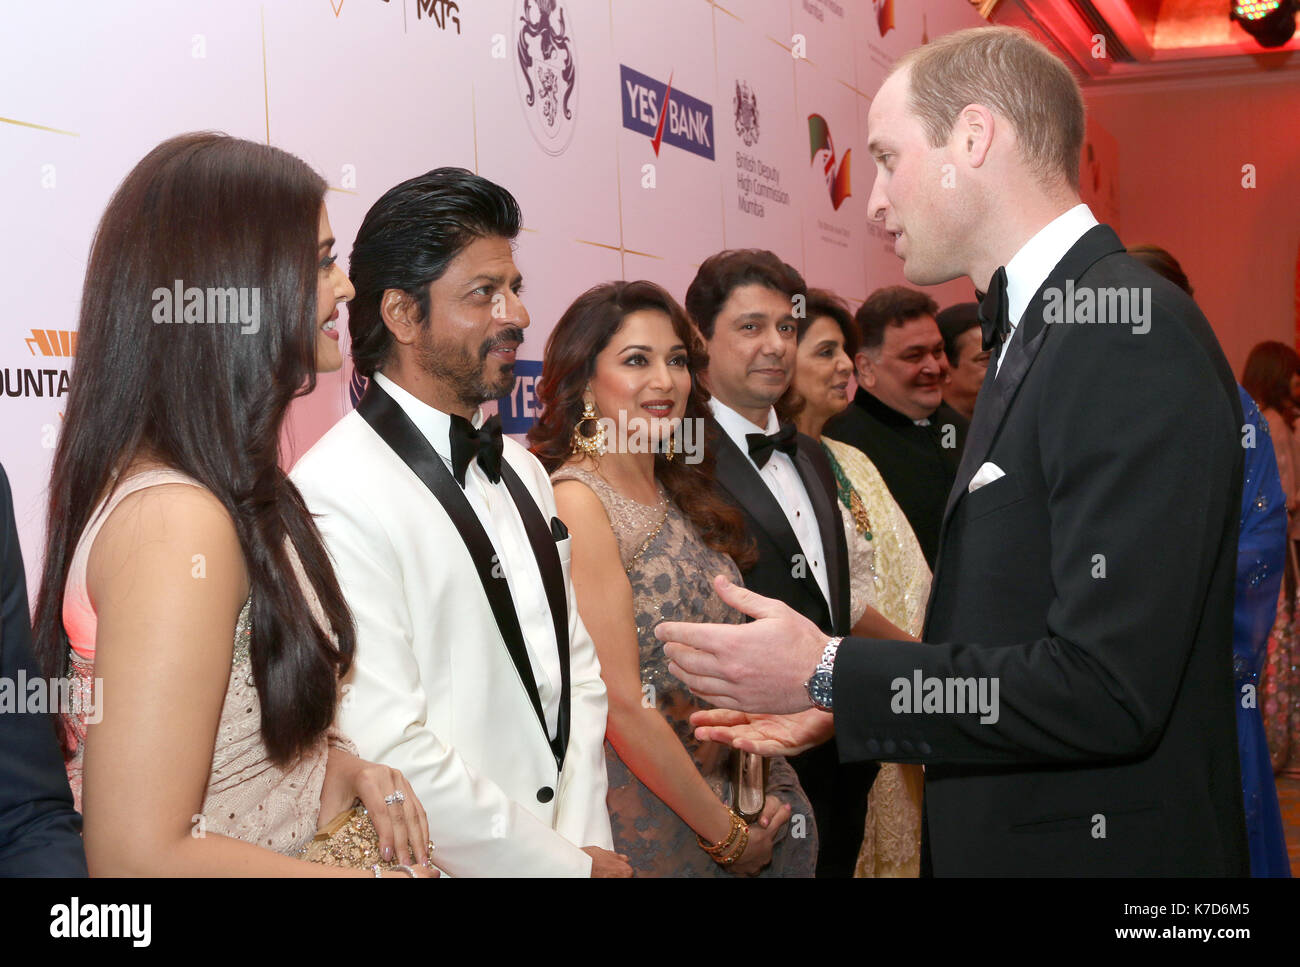 Photo Must Be Credited ©Alpha Press 065630 10/04/2016 Prince William Duke of Cambridge chats to Aishwarya Rai Bachchan and Shah Rukh Khan with Shriram Nene and Madhuri Dixit at a Gala Dinner and reception with Bollywood stars and figures from the business world in Mumbai, India Stock Photo